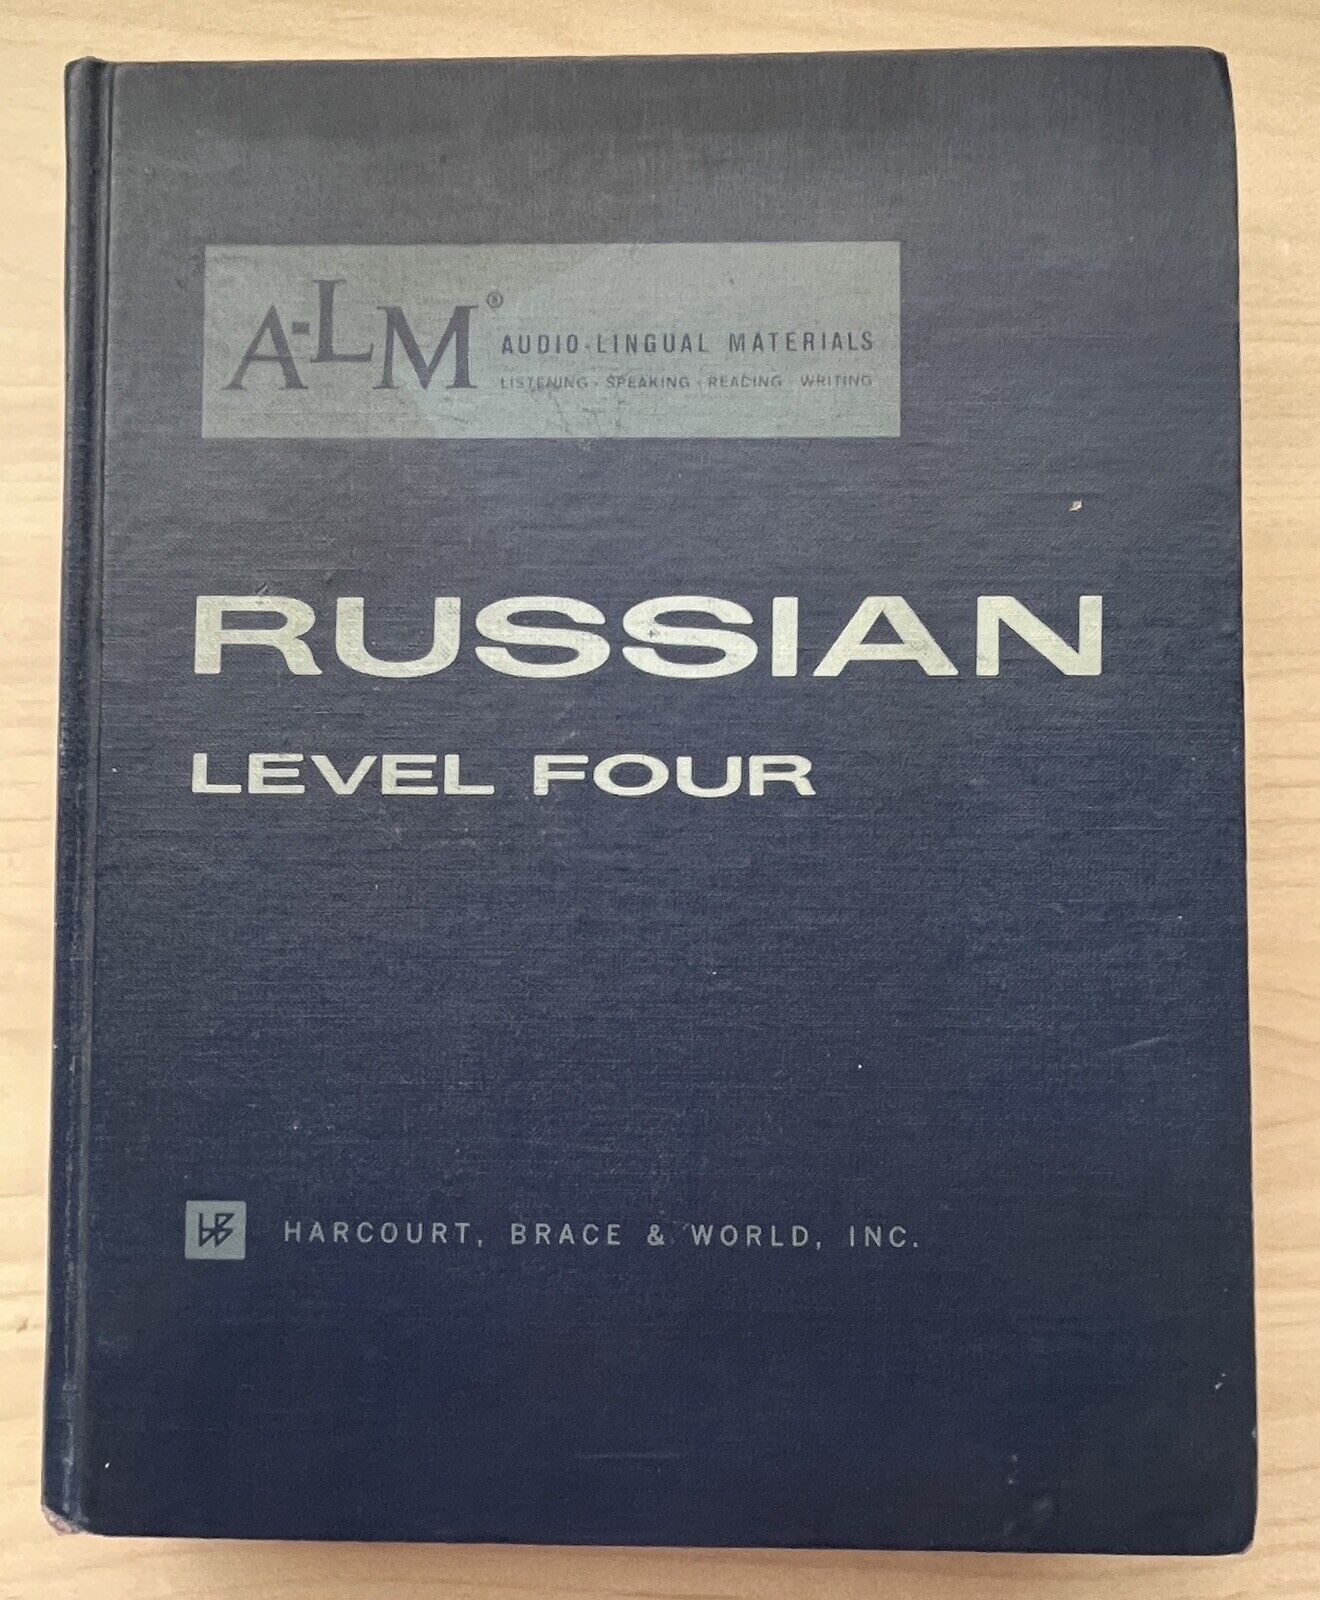 RARE 1965 ALM Russian Level 4 Modern Language Materials Center BOOK Only